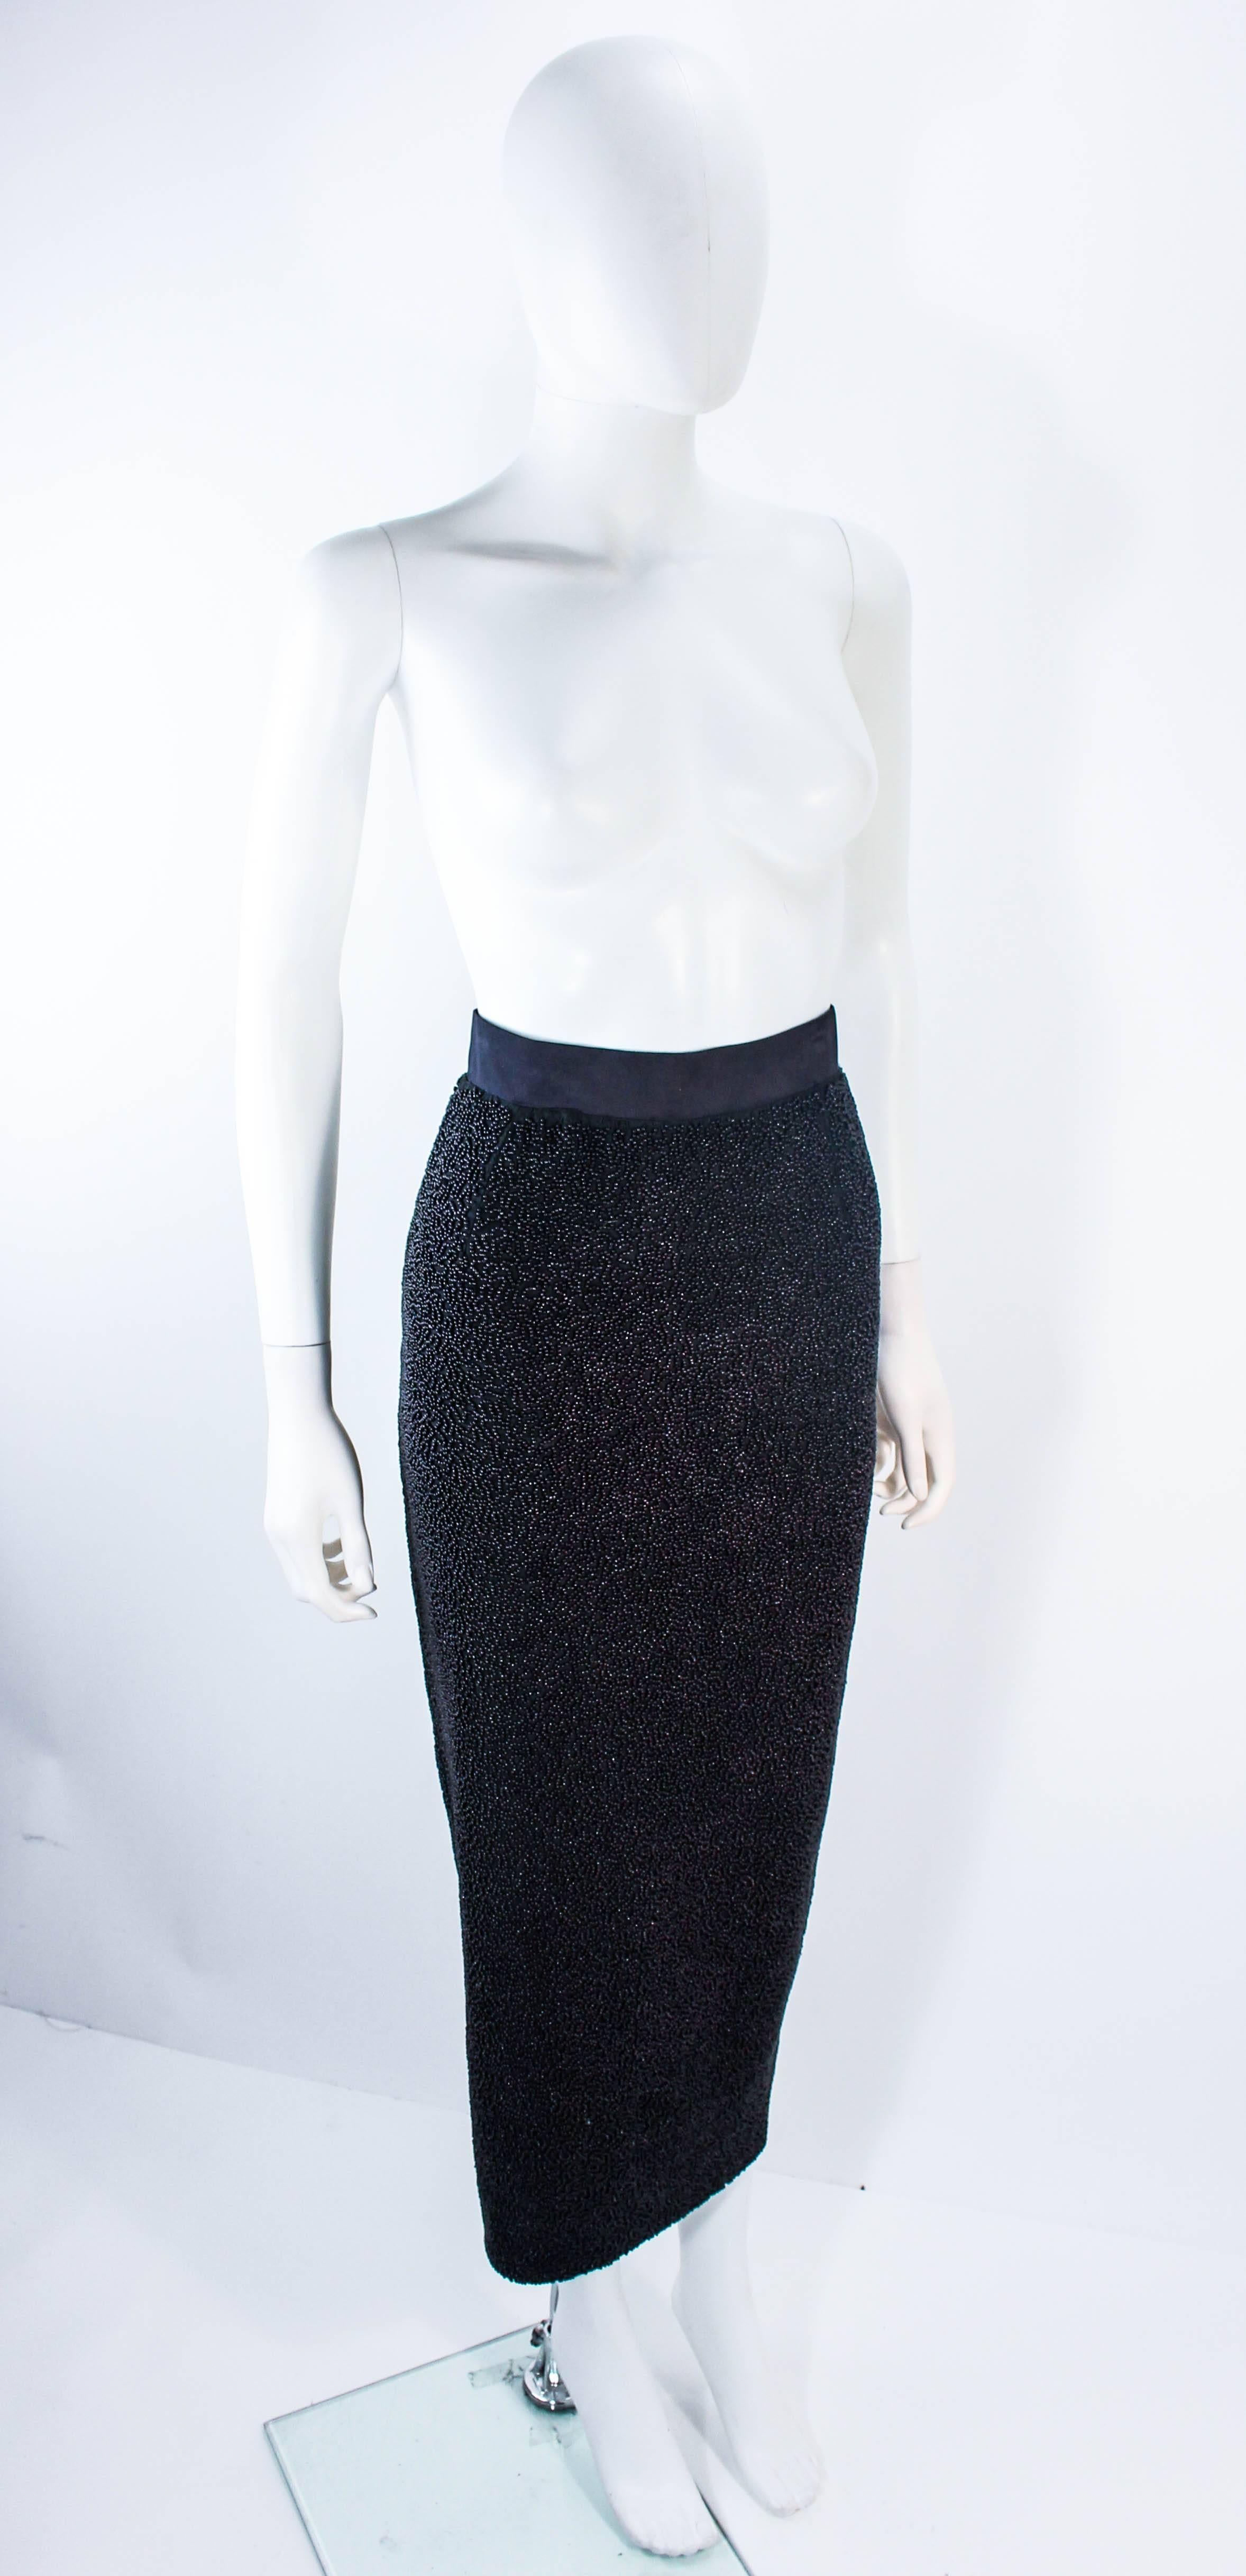 JEAN PAUL GAULTIER Vintage Beaded Full Length Silk Skirt Size 40 In Excellent Condition For Sale In Los Angeles, CA